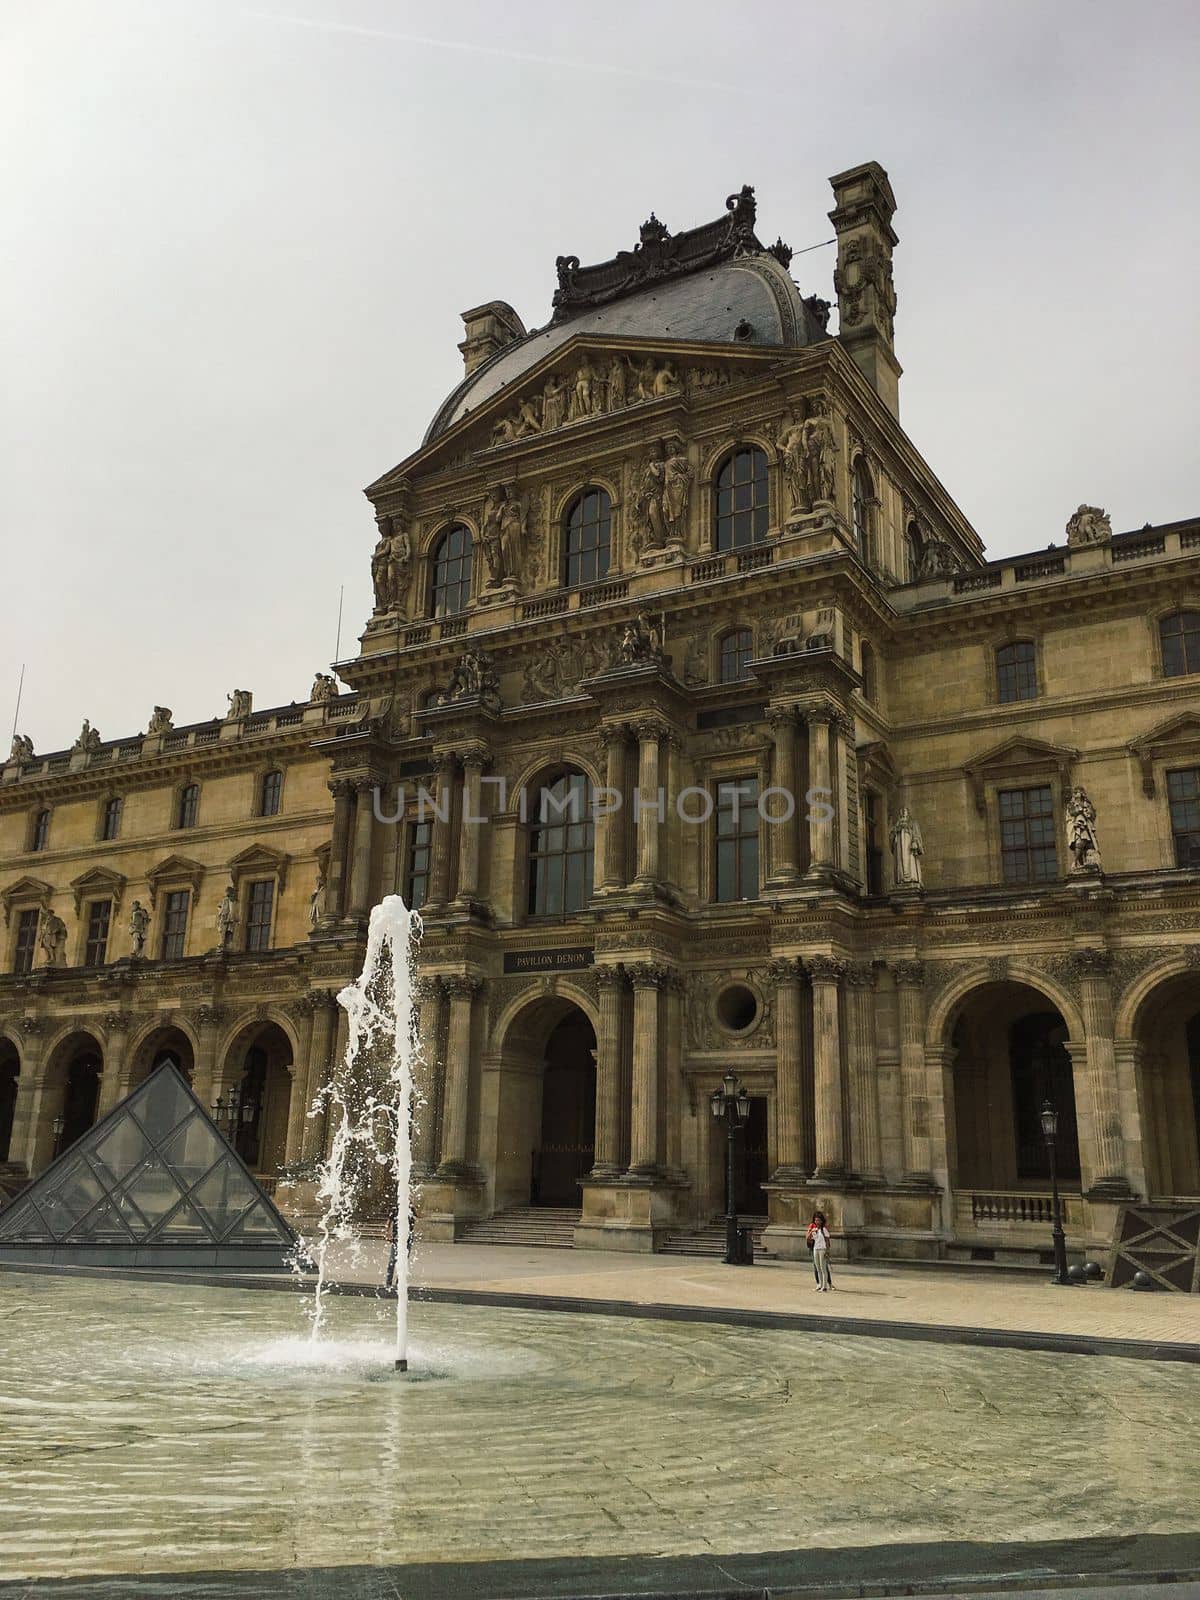 View from the outside of the Louvre in Paris by WeWander